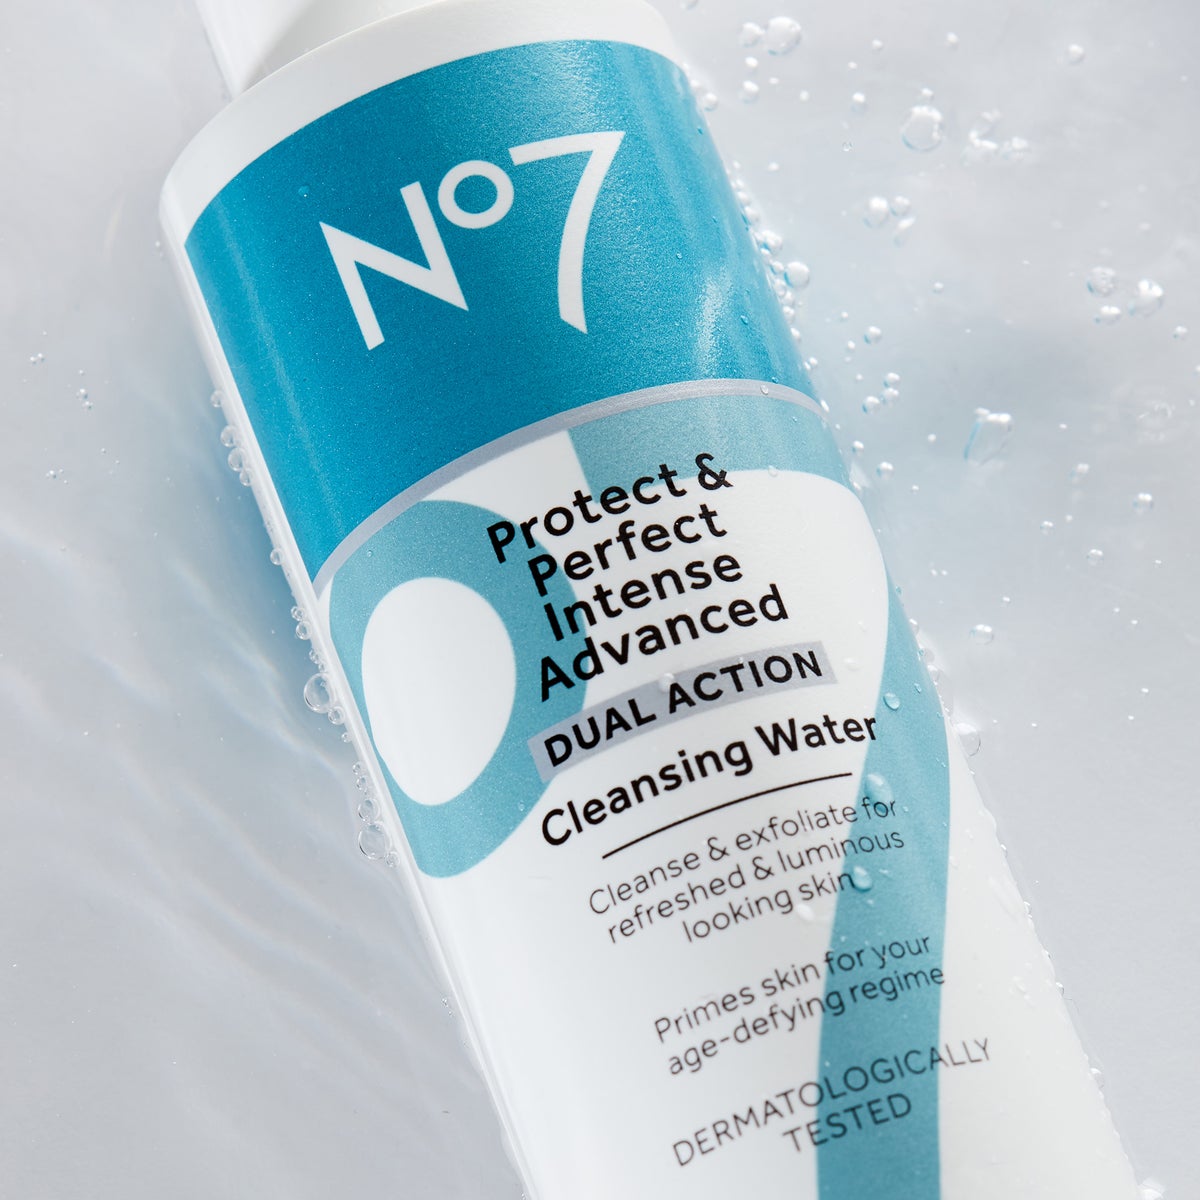 No7 - Do you use our Protect & Perfect skincare products